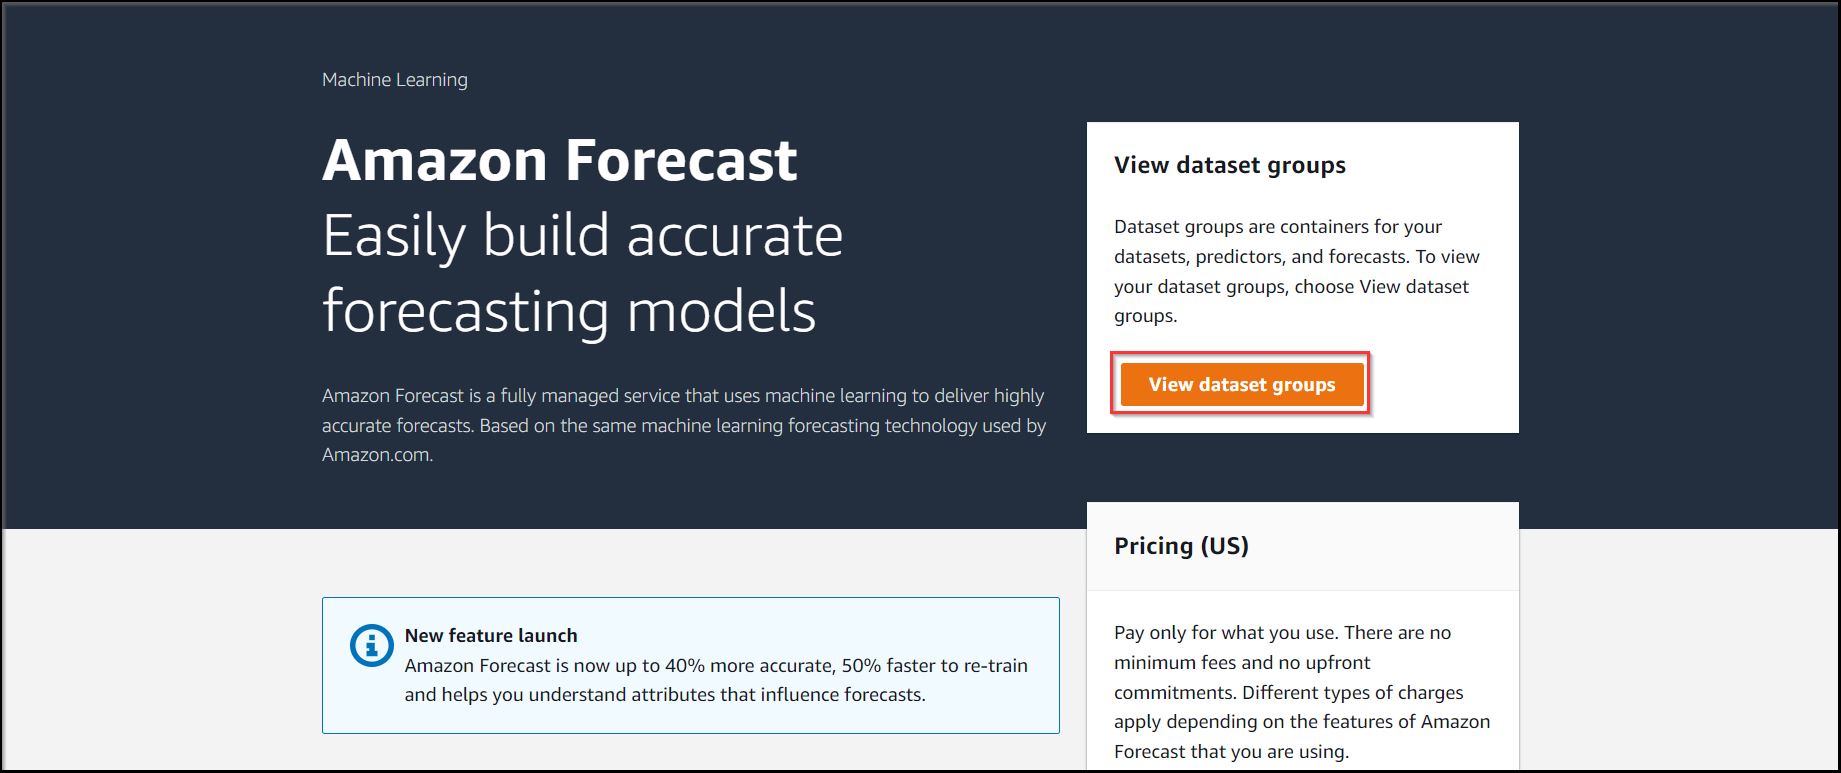 Figure 1: View dataset group on the Amazon Forecast home page